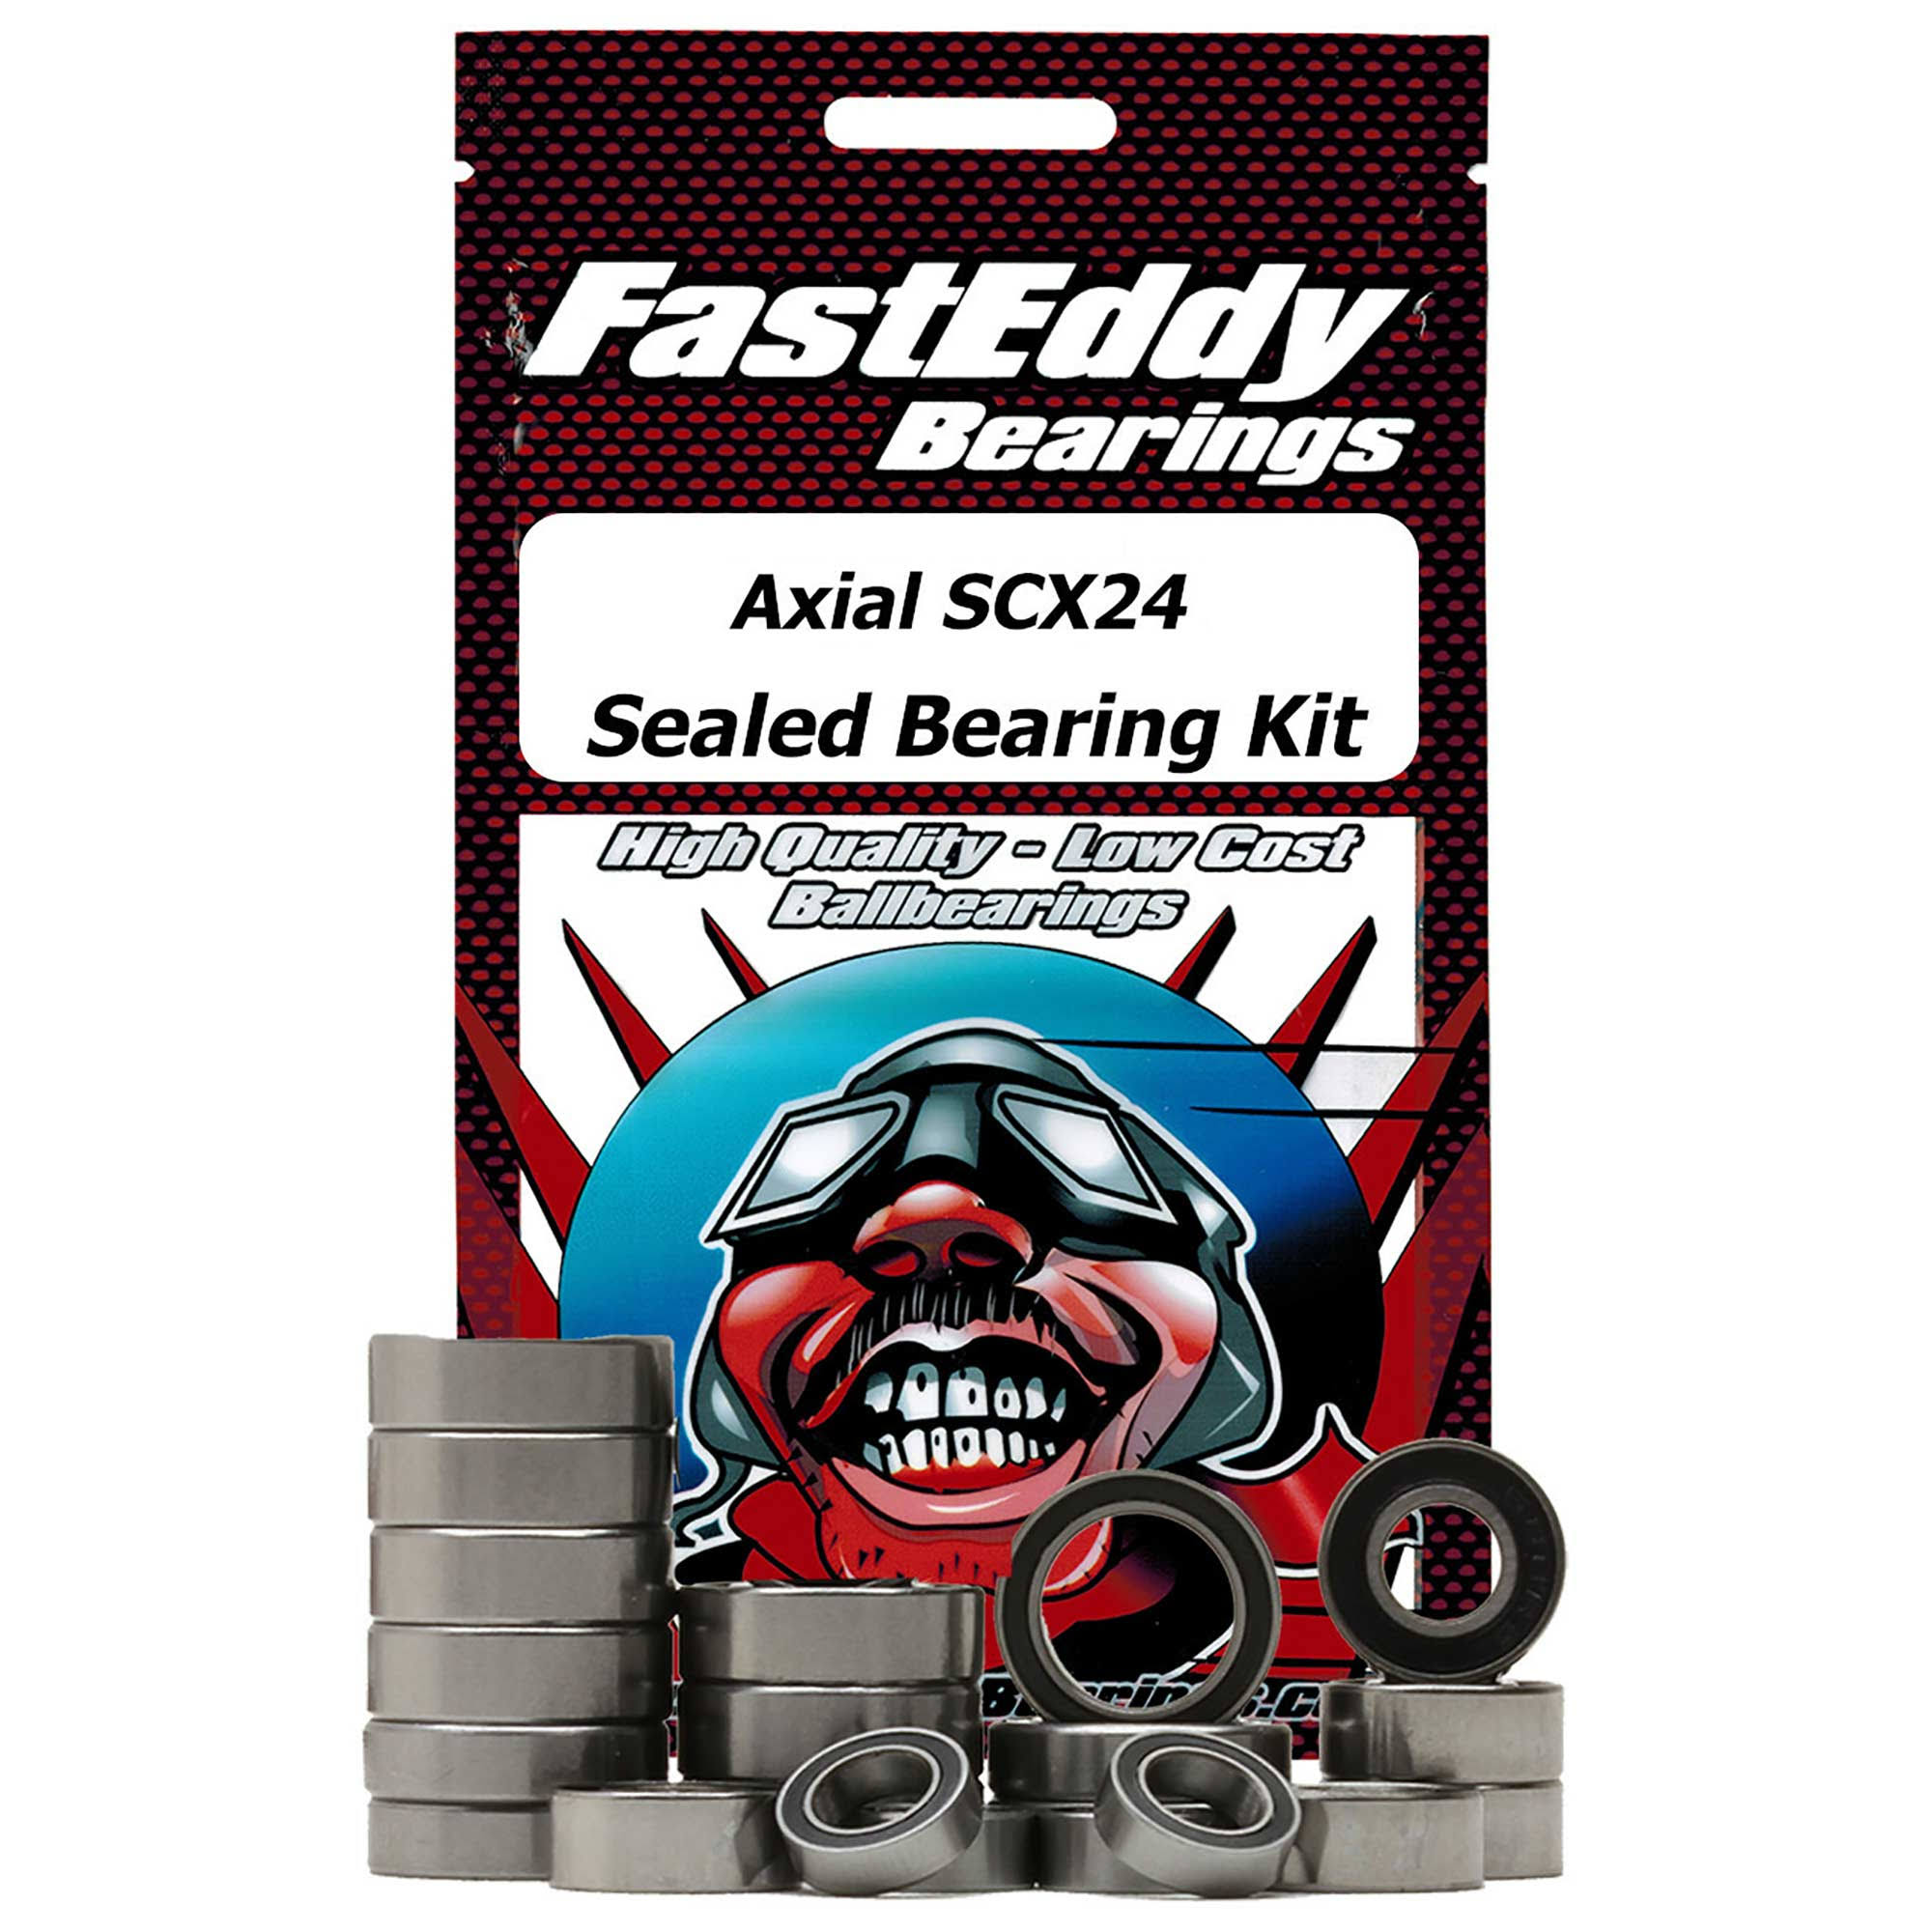 FastEddy Bearings Compatible With Axial Scx24 1967 C10 Sealed Bearing